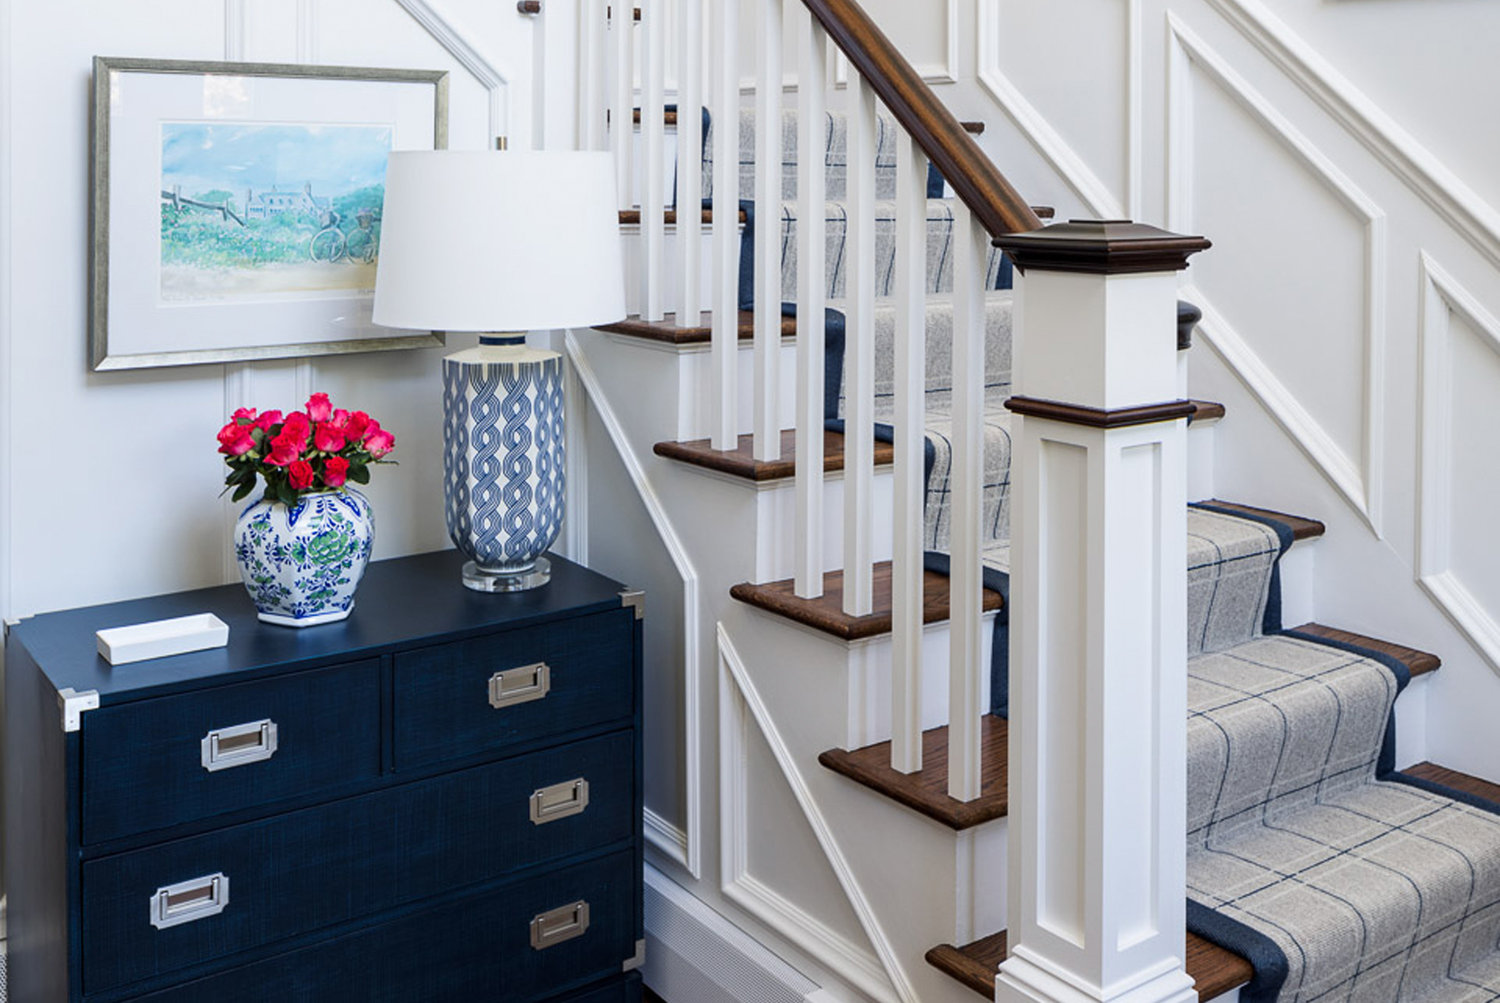 Stair runners add warmth and style